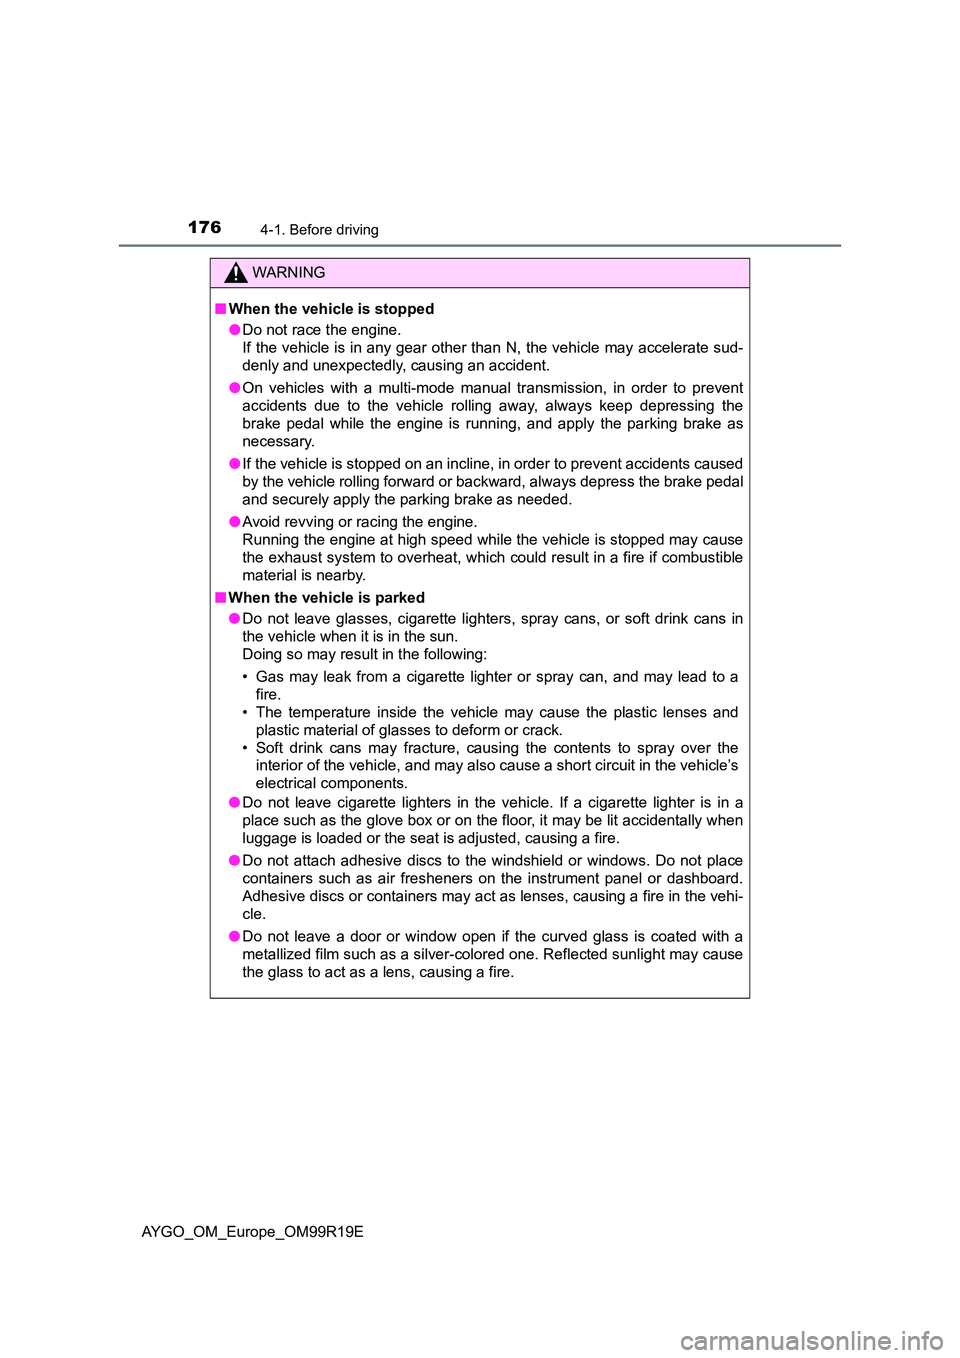 TOYOTA AYGO 2019  Owners Manual (in English) 1764-1. Before driving
AYGO_OM_Europe_OM99R19E
WARNING
■When the vehicle is stopped 
● Do not race the engine. 
If the vehicle is in any gear other than N, the vehicle may accelerate sud- 
denly a